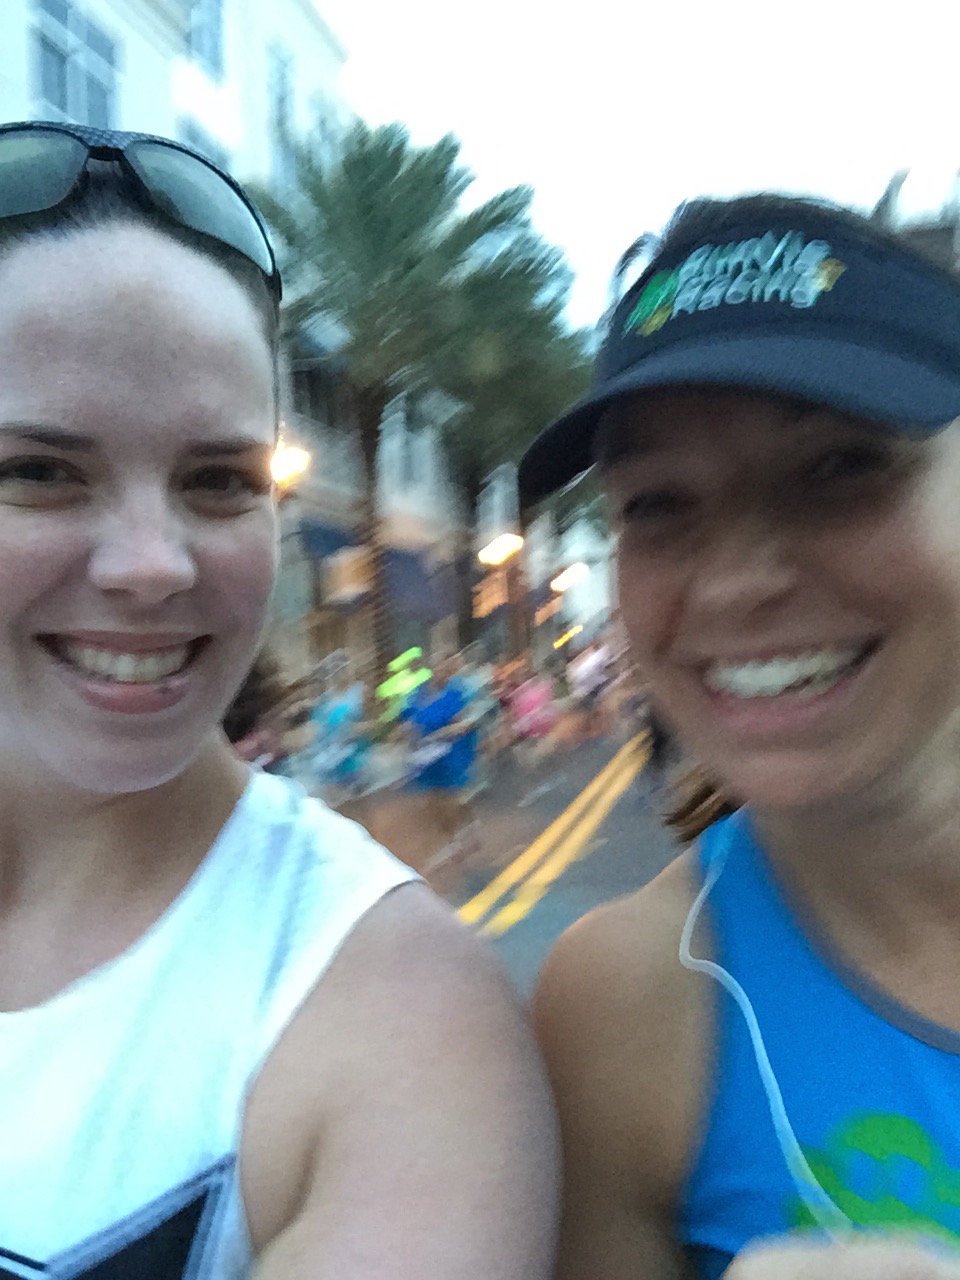 This is what a running selfie looks like!